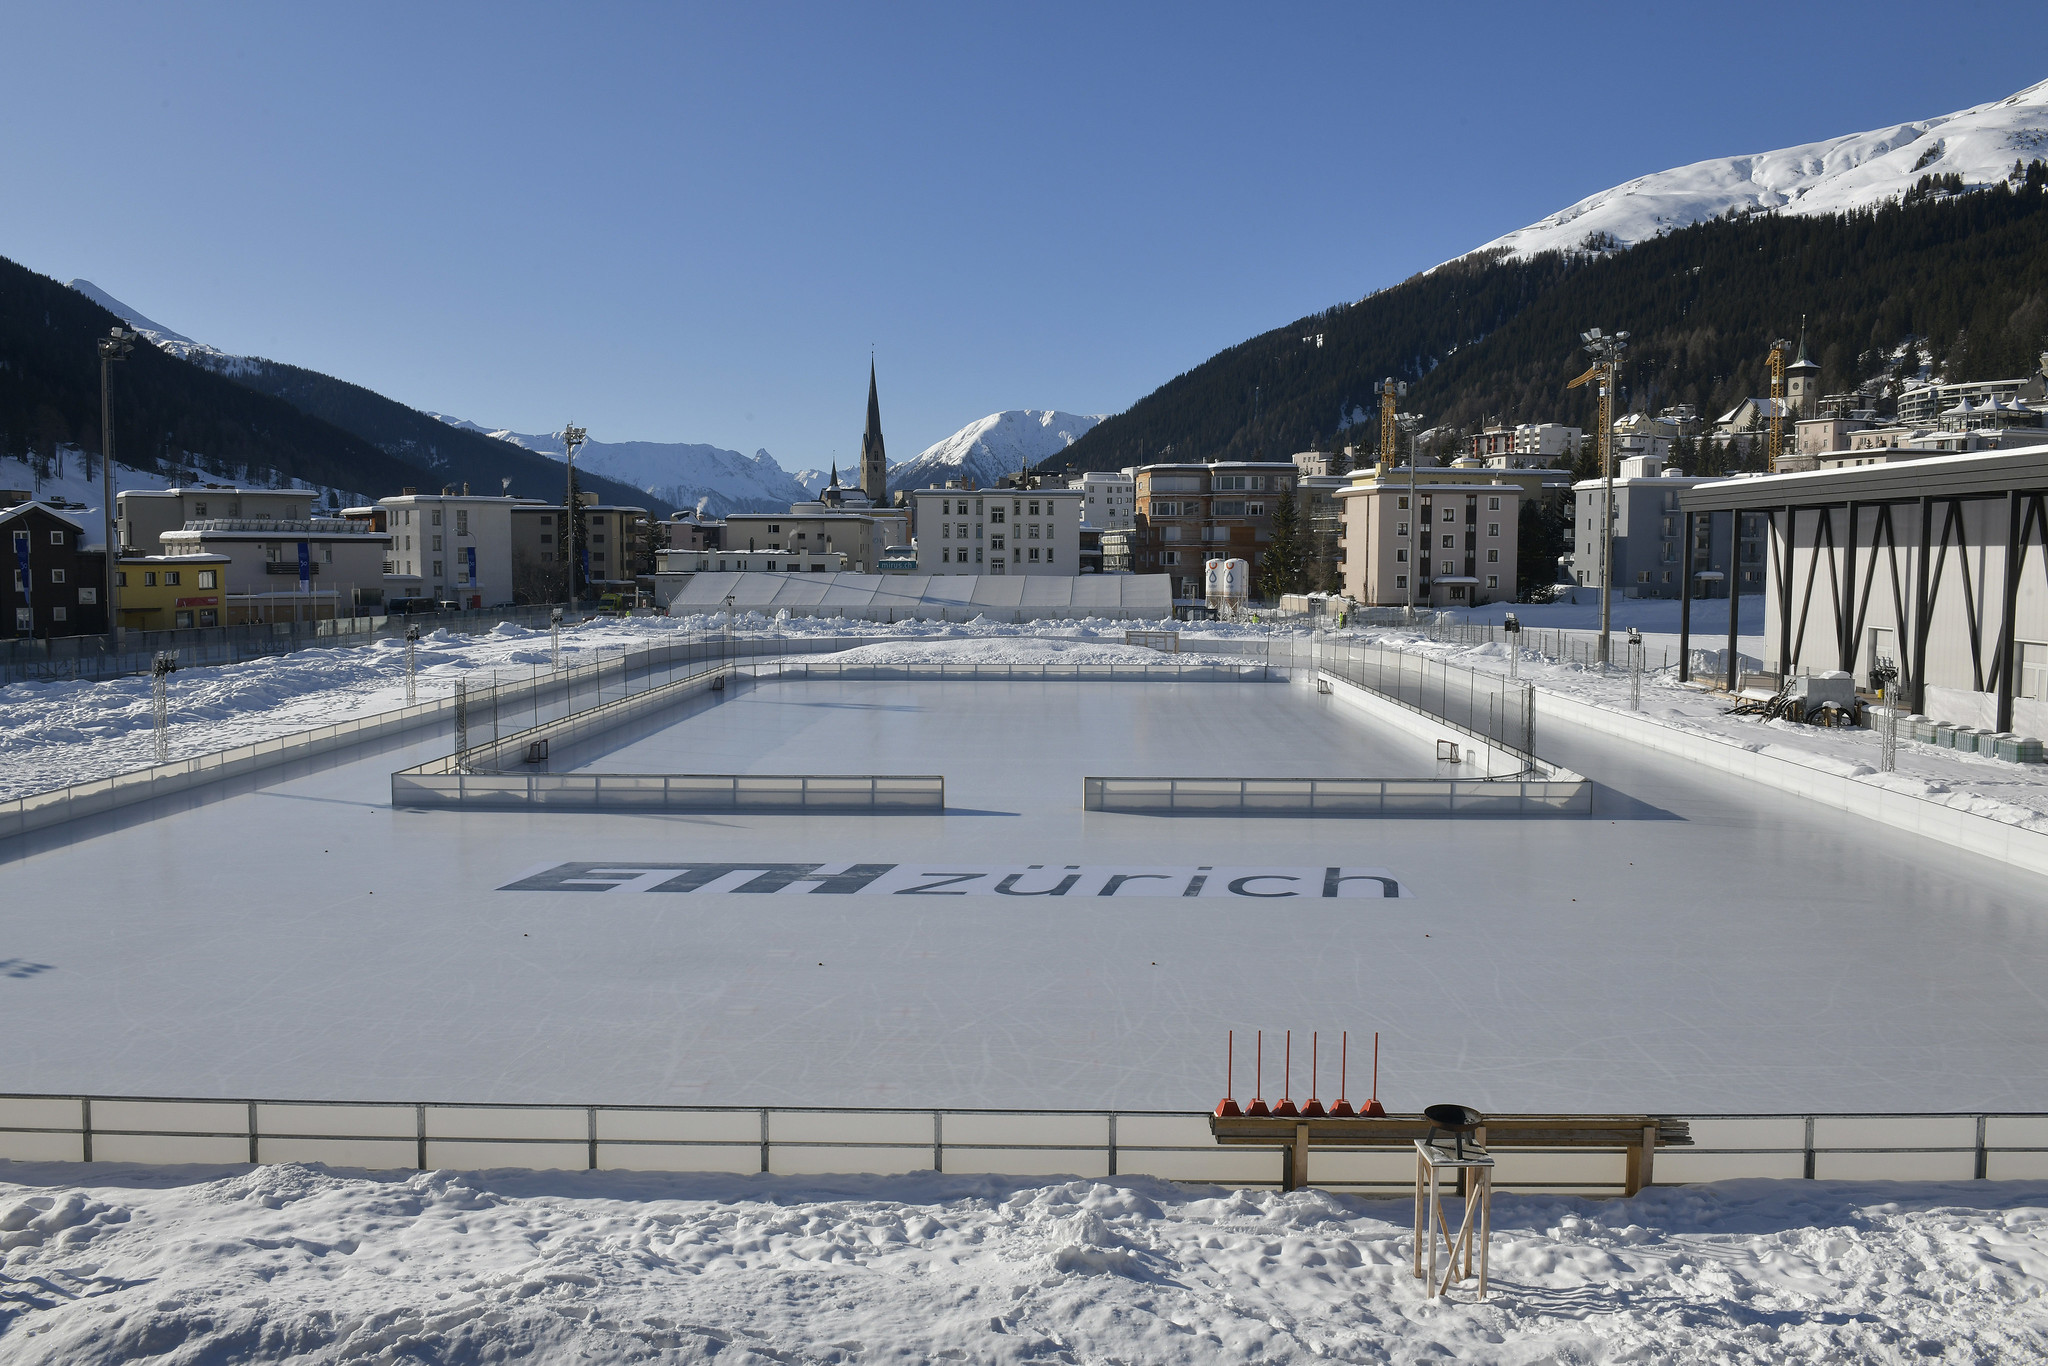 ETH Meets Davos 2020 - Ice skating field